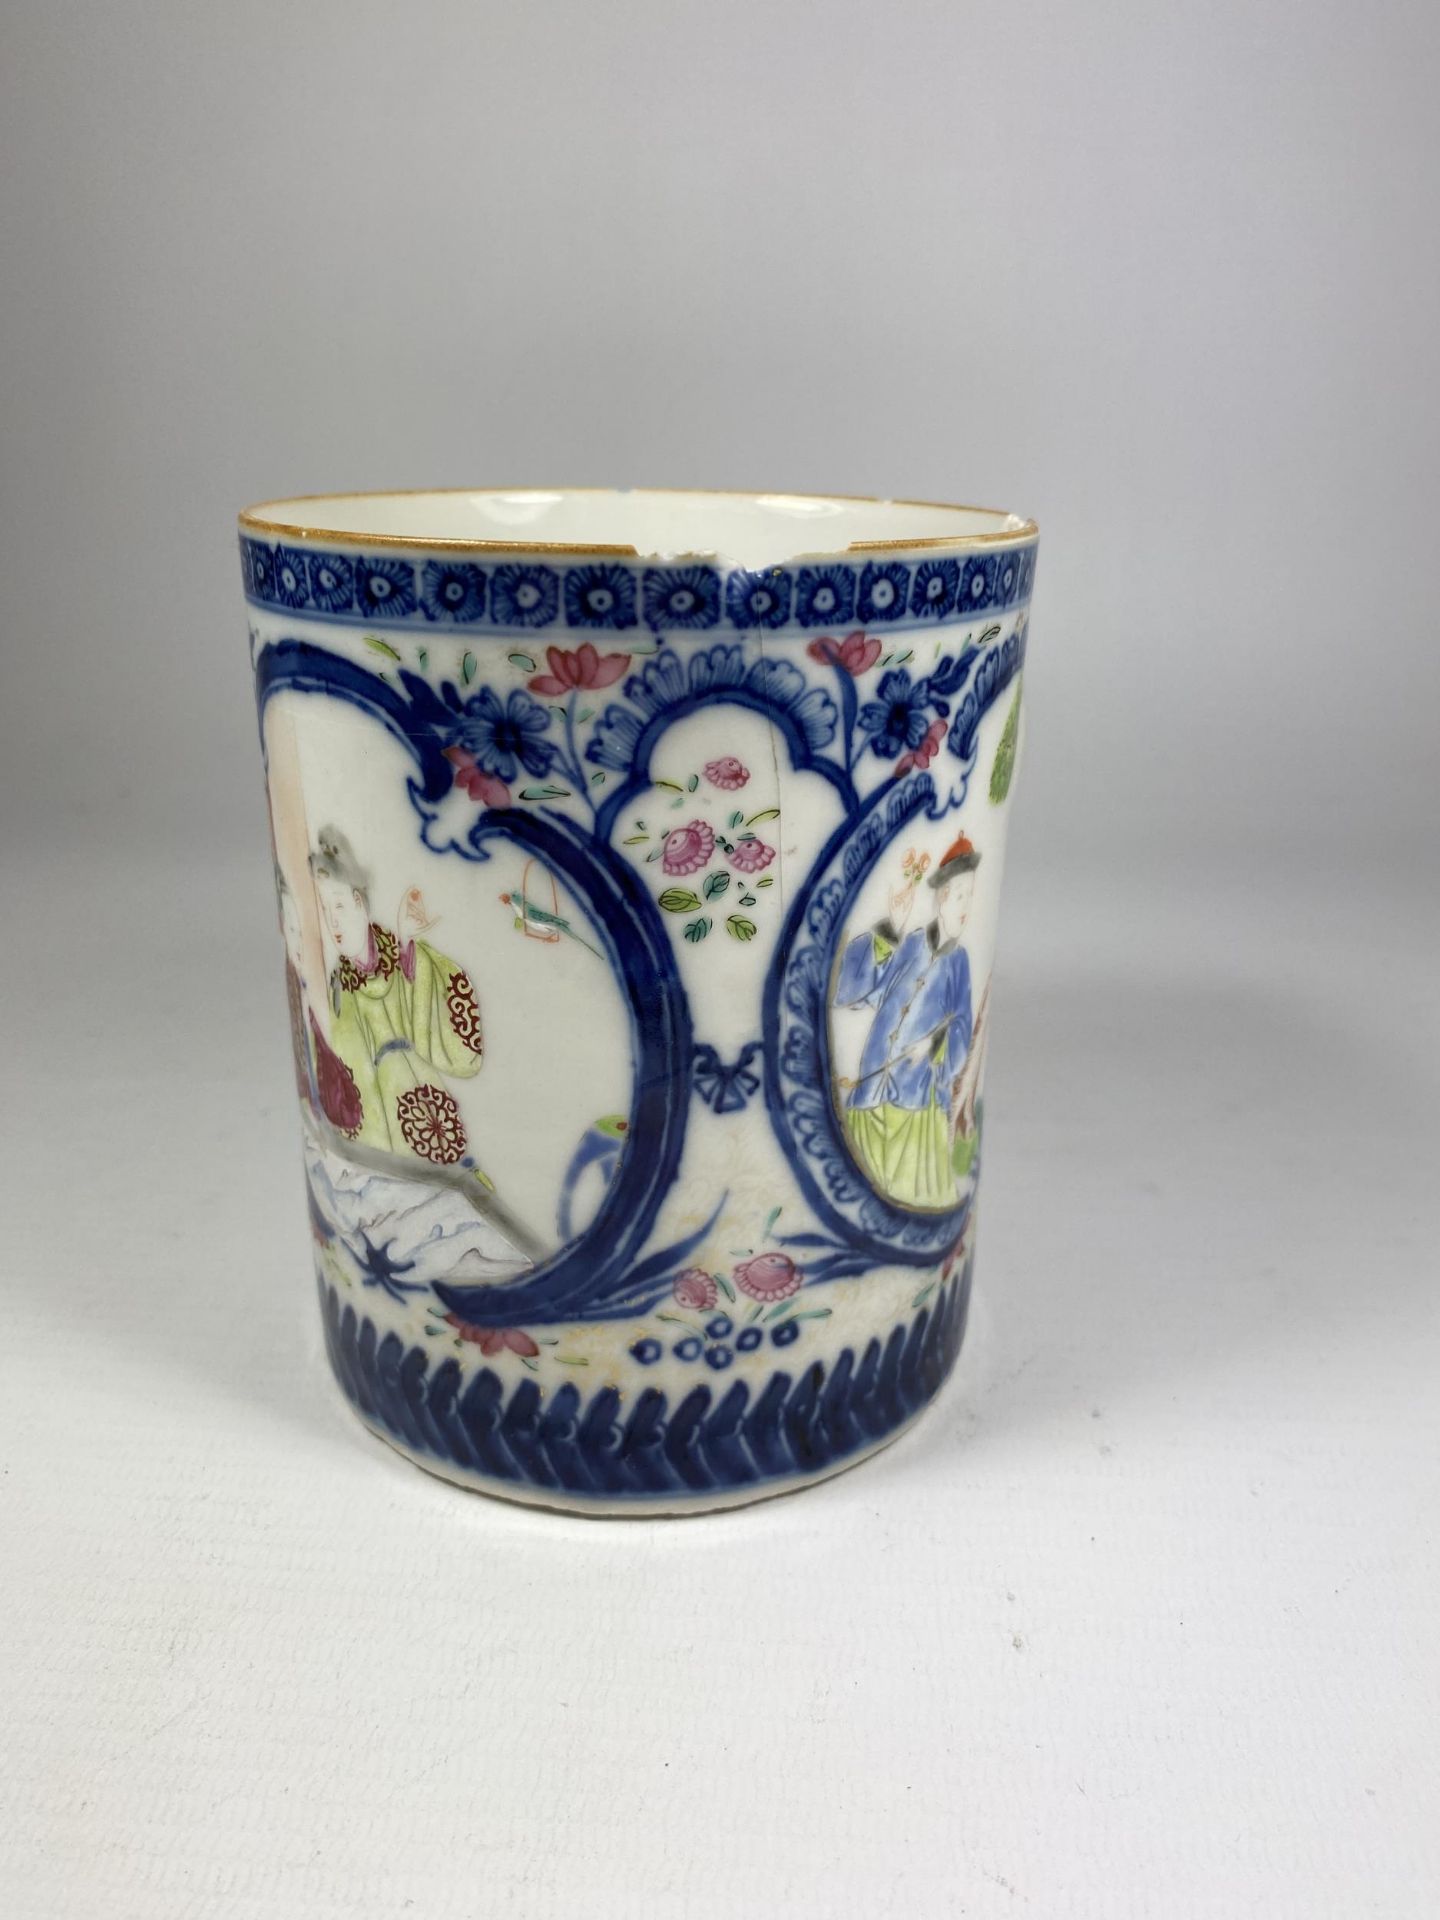 A LATE 18TH CENTURY CHINESE FAMILLE ROSE EXPORT TANKARD DEPICTING FIGURES IN A GARDEN LANDSCAPE, - Image 2 of 6